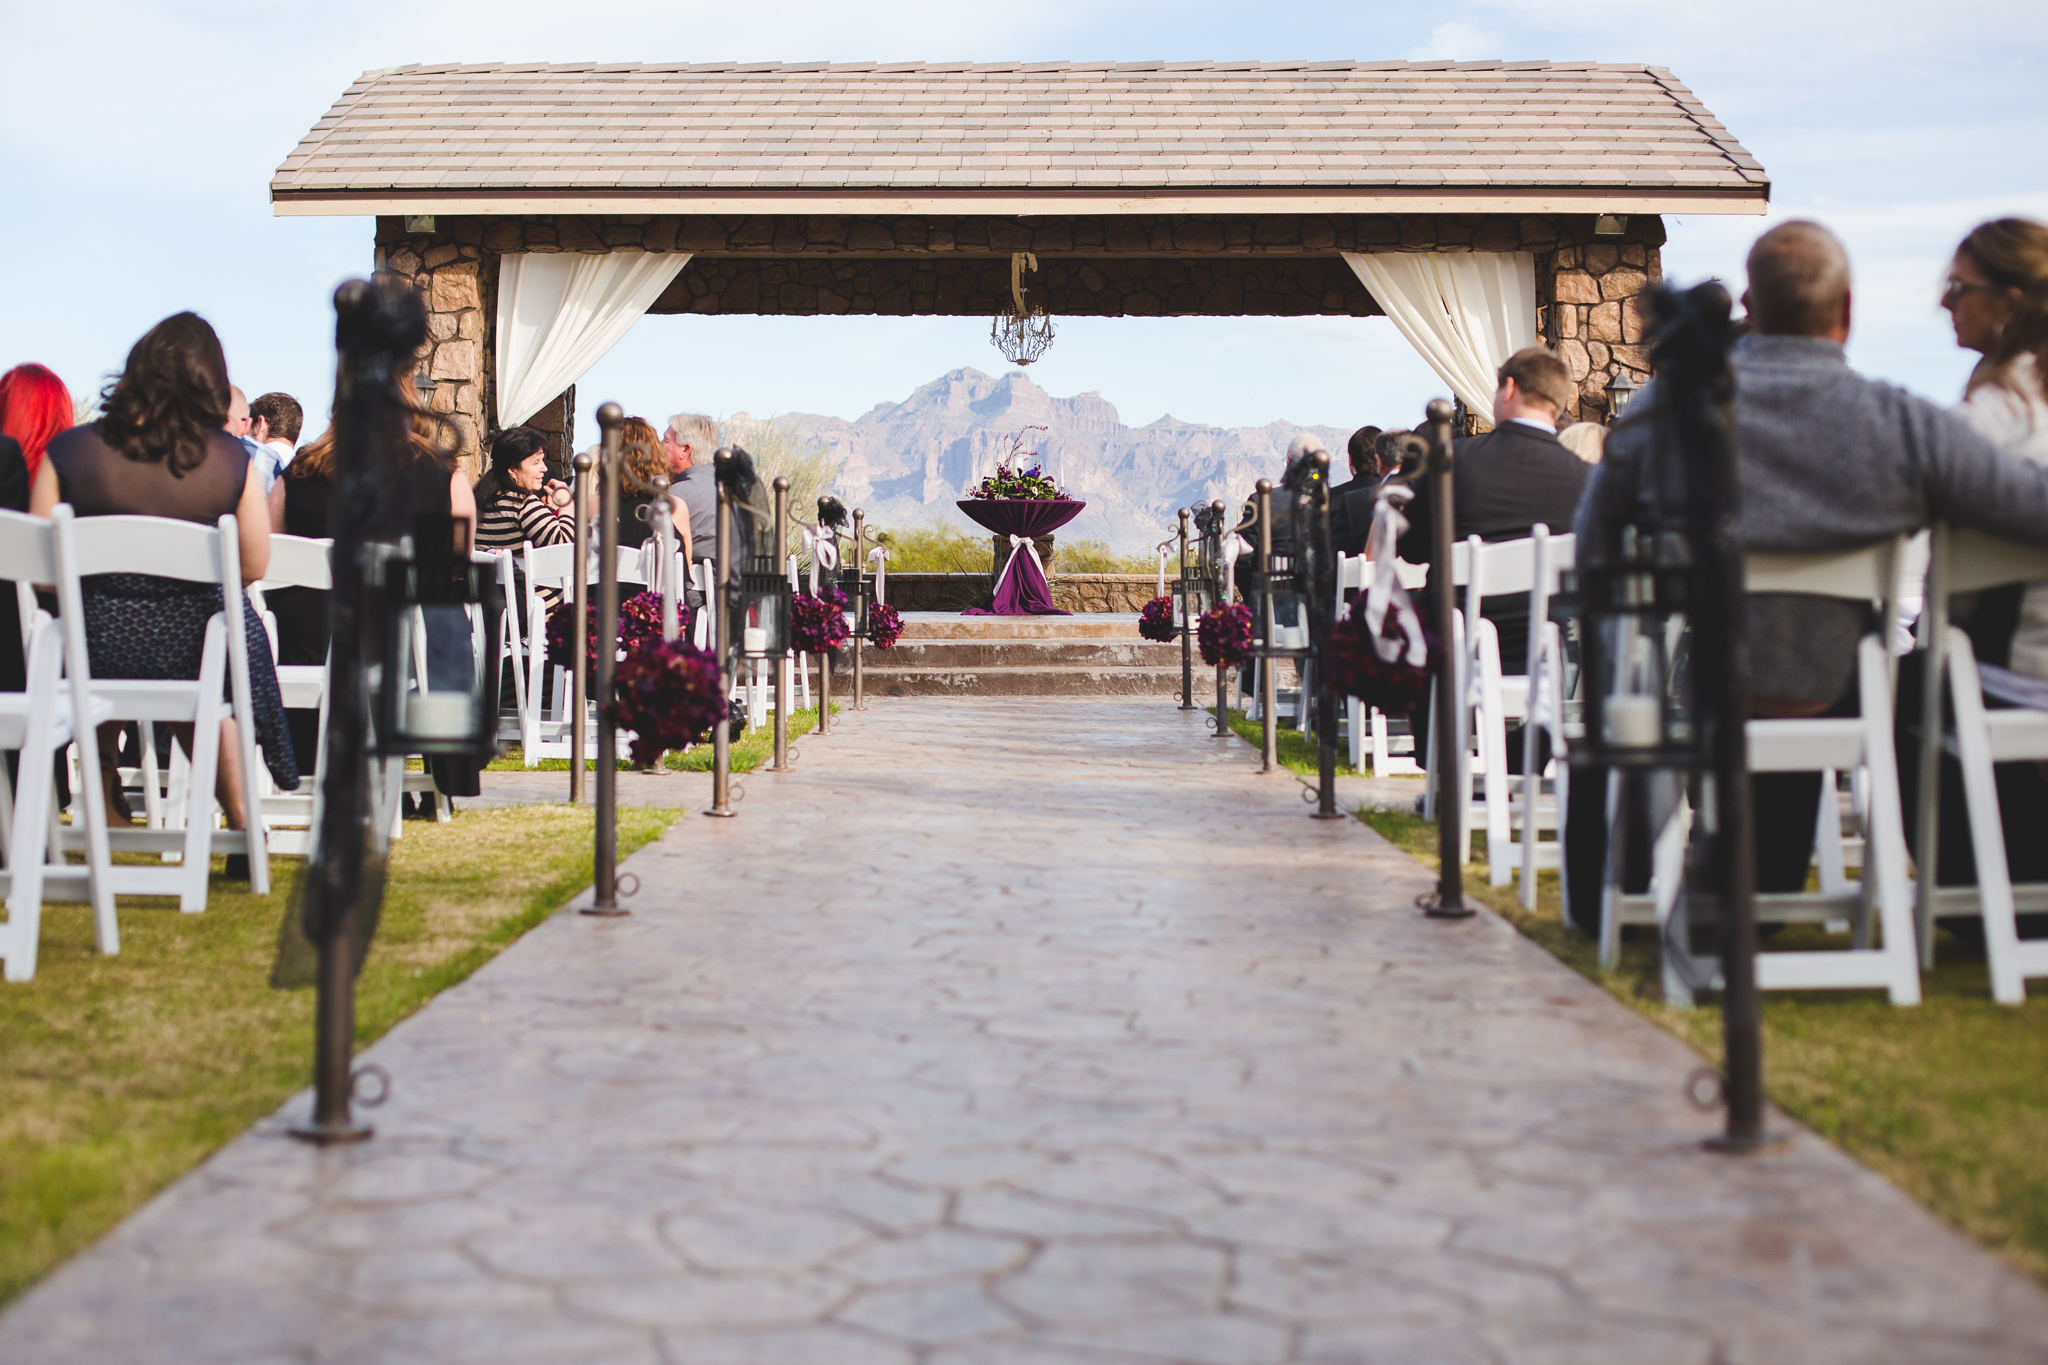 beautiful ceremony aisle superstition manor superstition mountains mj